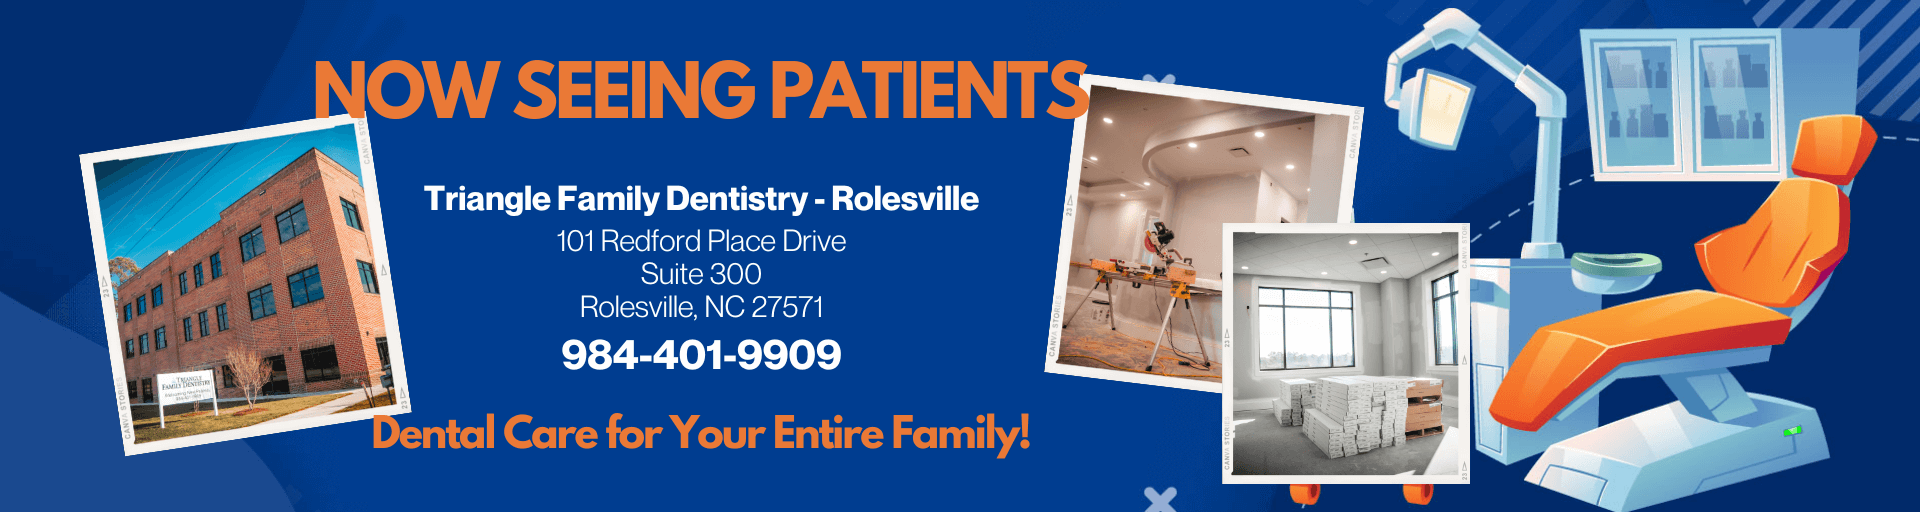 Triangle Family Dentistry - Rolesville NC